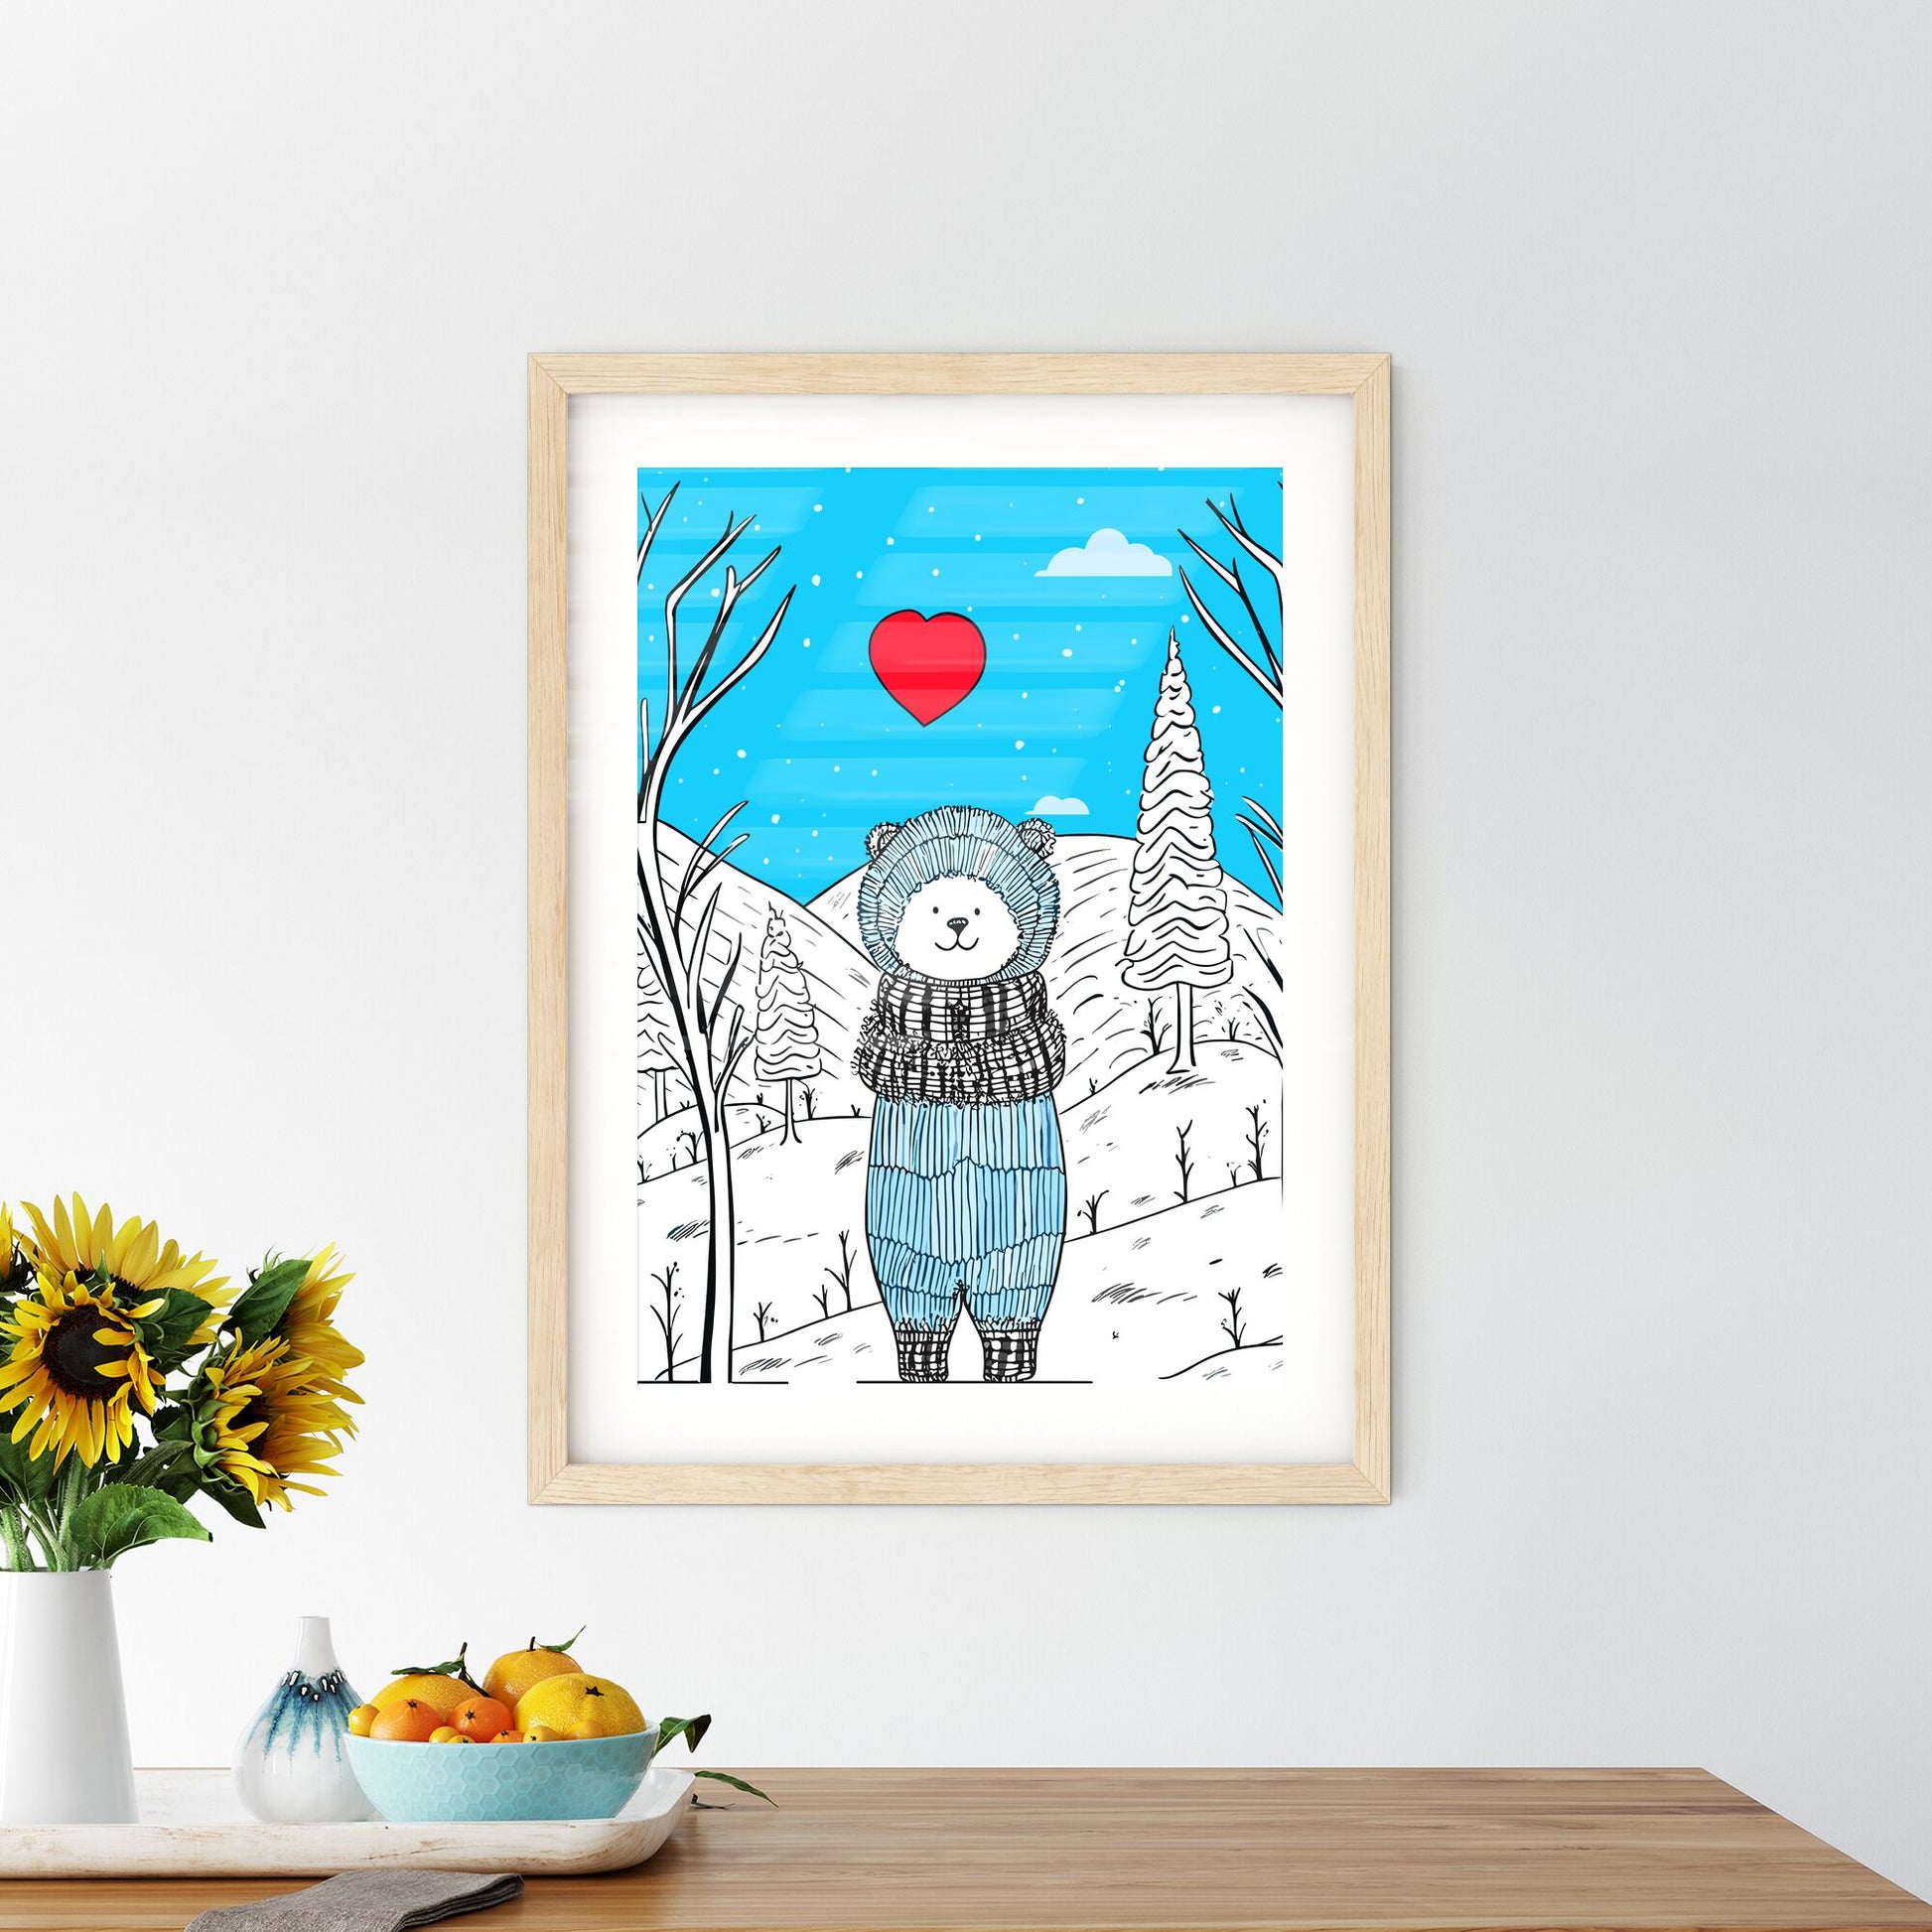 Merry Christmas Card With A Cute Bear Huging A Heart - A Cartoon Of A Bear In A Blue Outfit Default Title